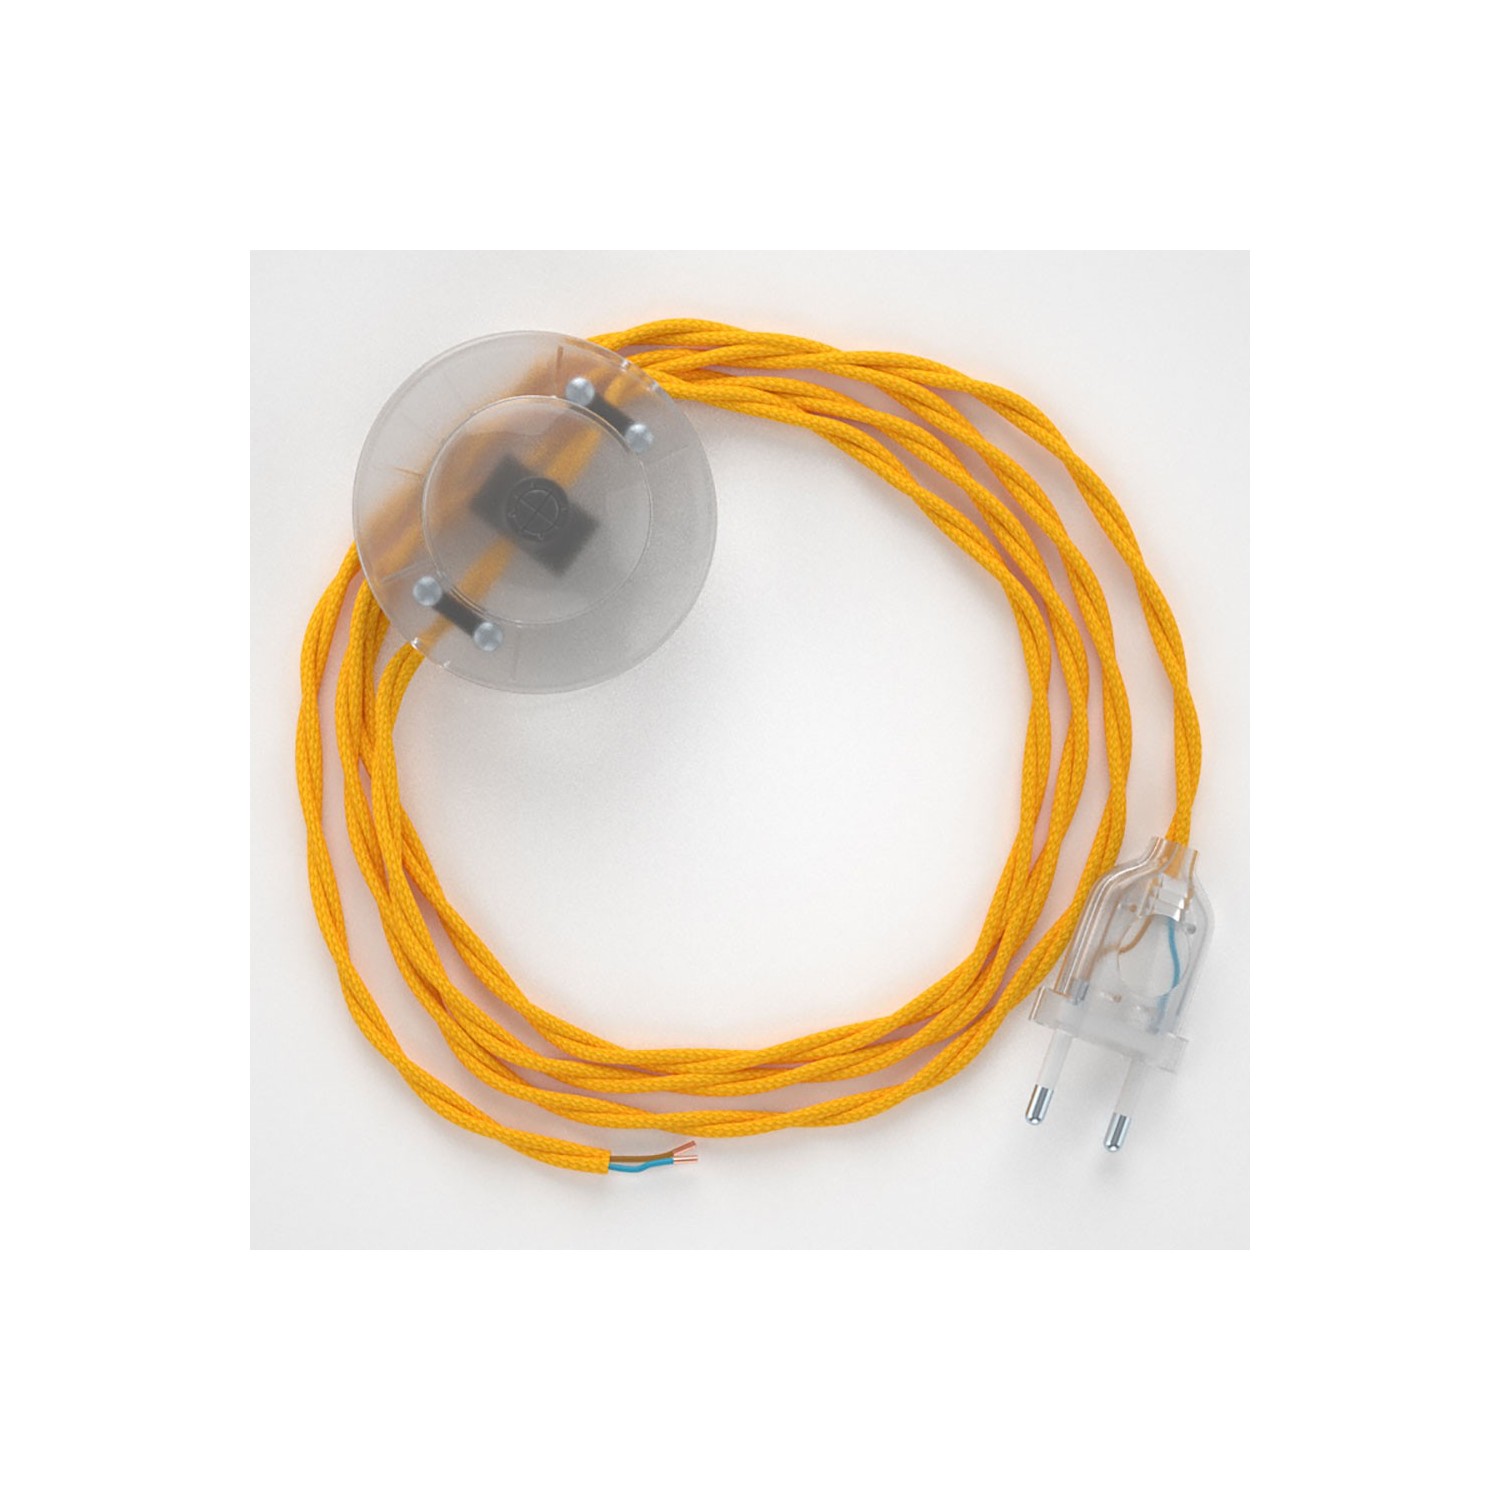 Wiring Pedestal, TM10 Yellow Rayon 3 m. Choose the colour of the switch and plug.